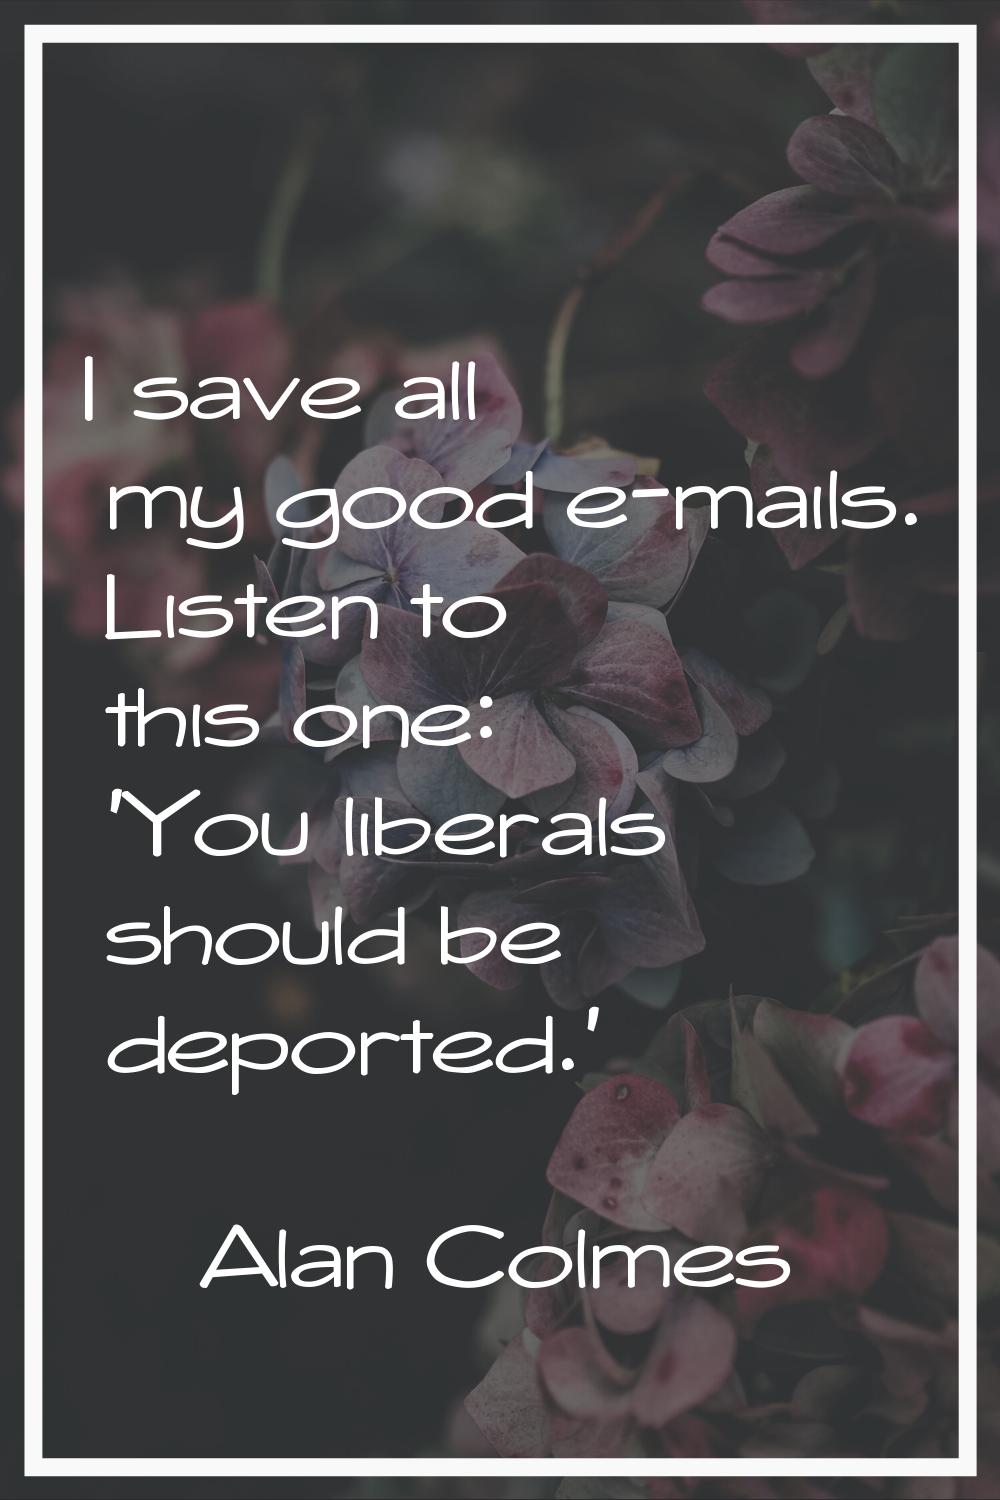 I save all my good e-mails. Listen to this one: 'You liberals should be deported.'